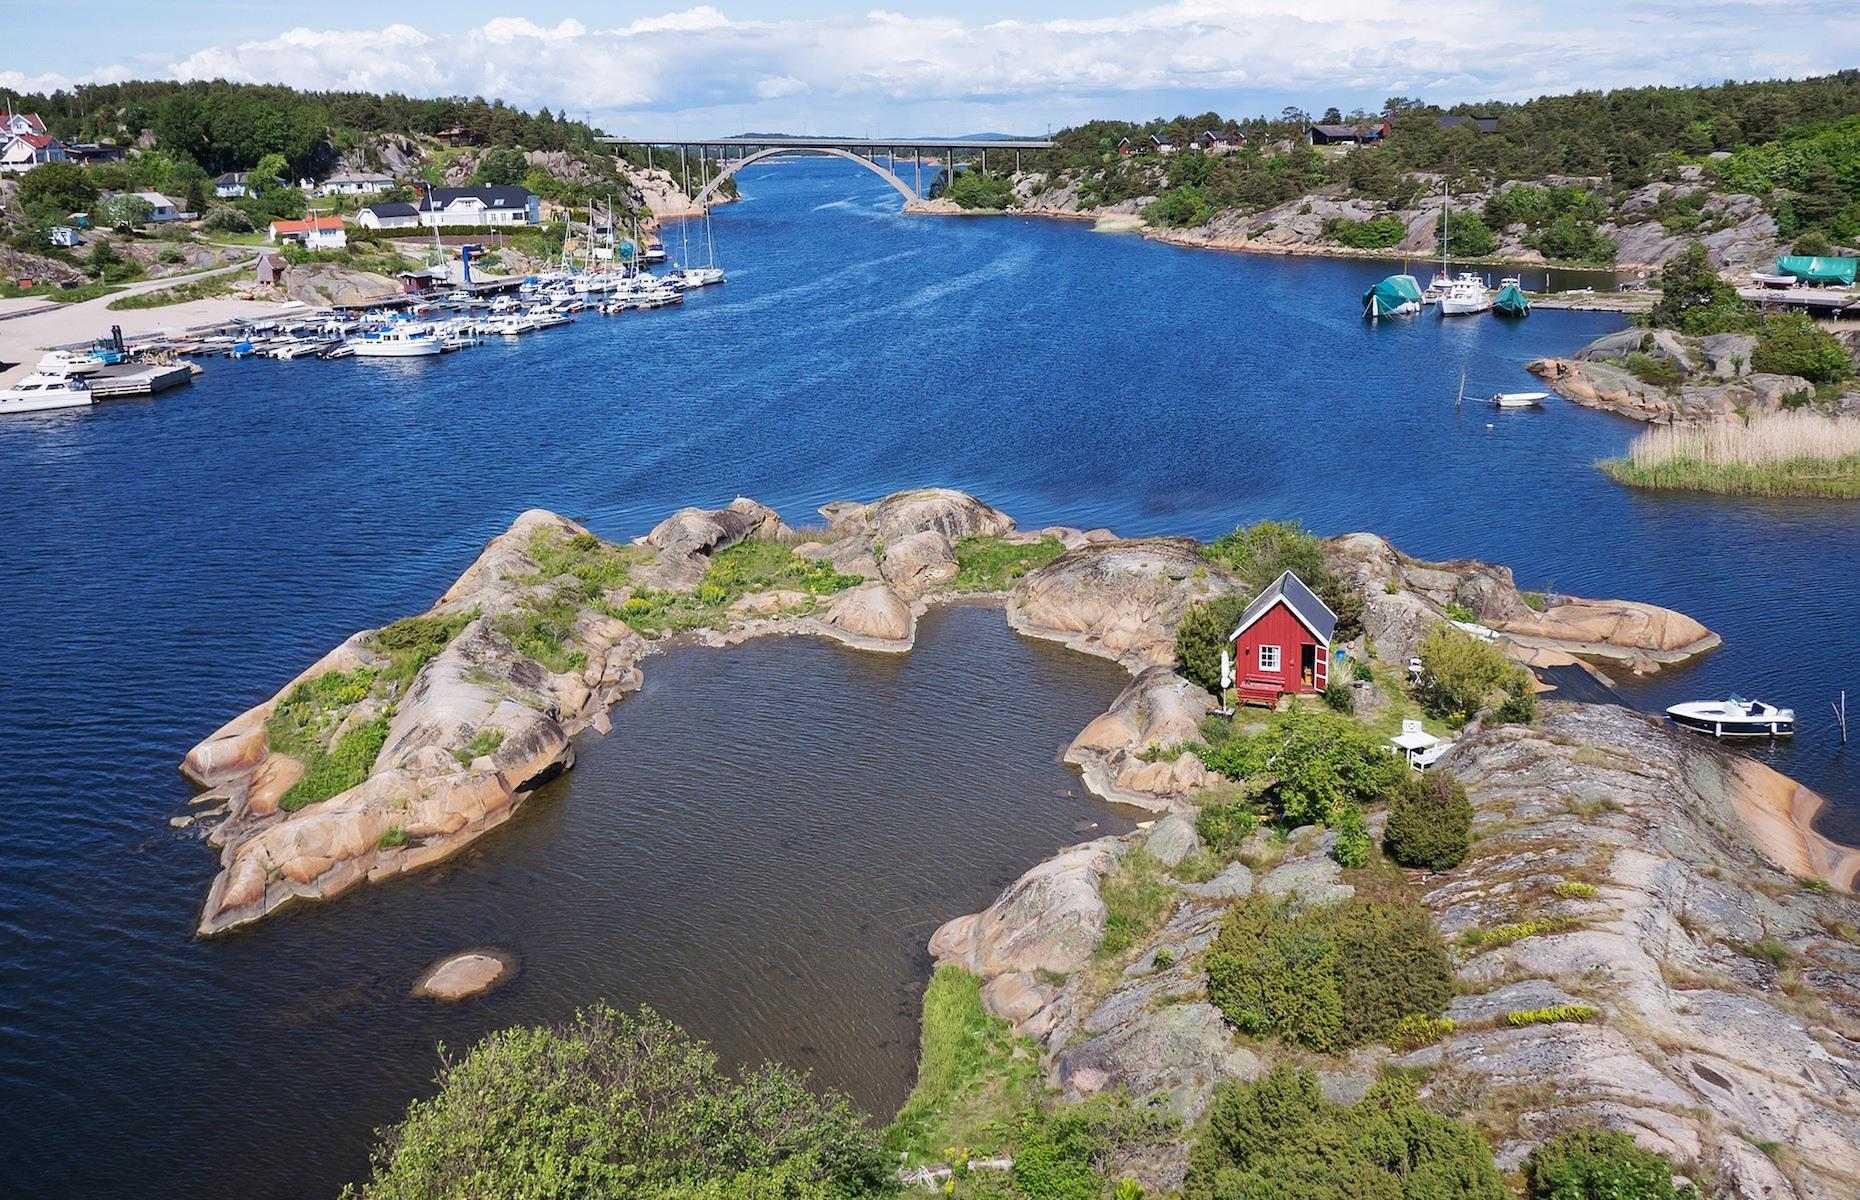 Just south of Norway lies the Hvaler Archipelago, a group of over 800 islands, islets and skerries including Båtholmen, a tiny private island retreat not far from Oslo. Båtholmen is home to a charming rust-red wooden cabin that can accommodate up to four guests. Fold-away and floor mattresses are also provided which can sleep an extra three people.